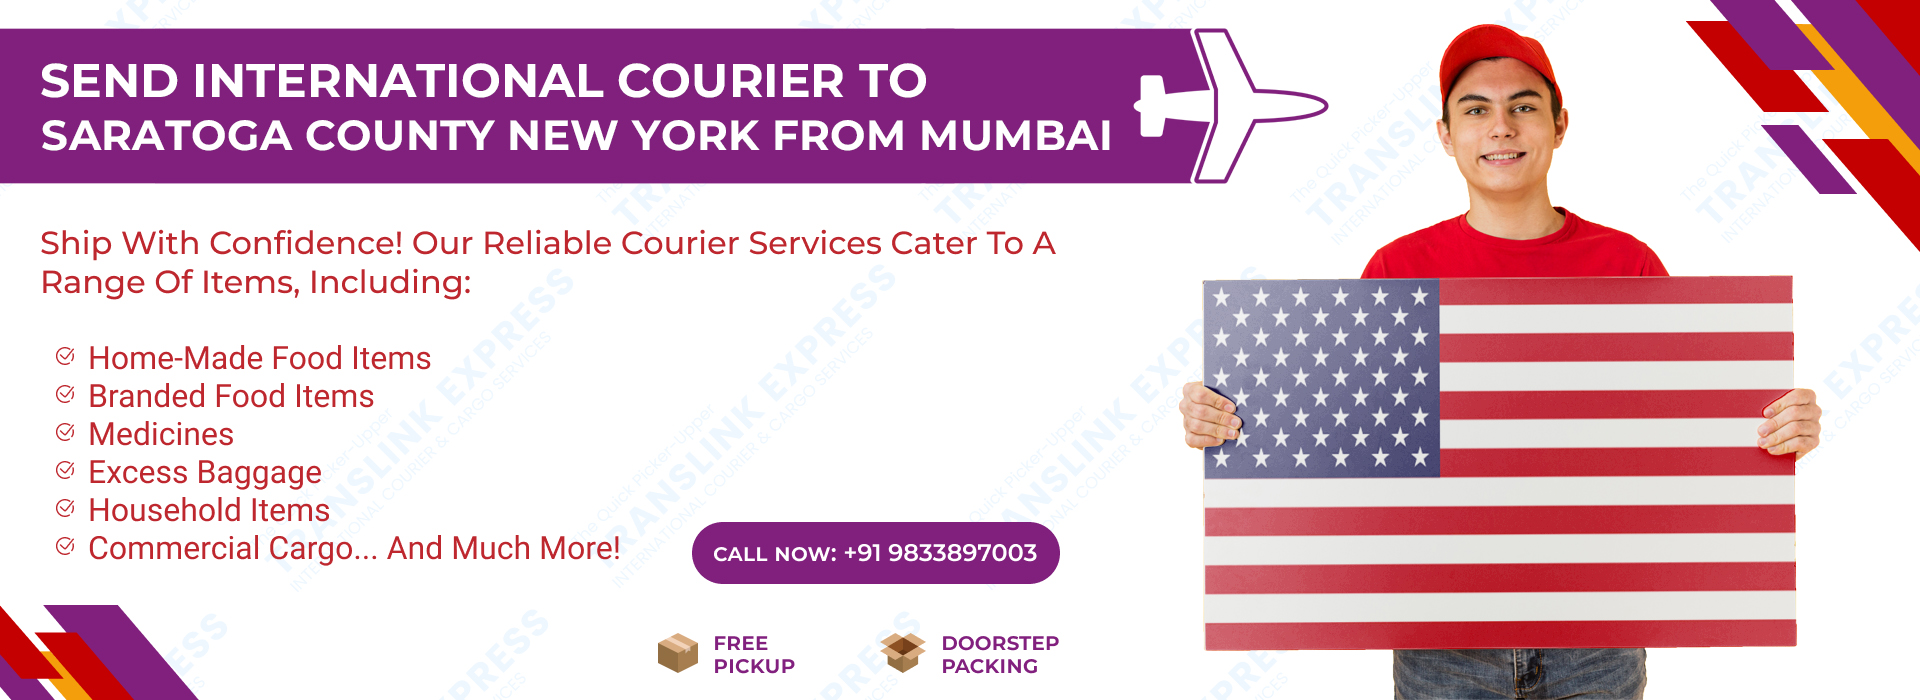 Courier to Saratoga County New York From Mumbai